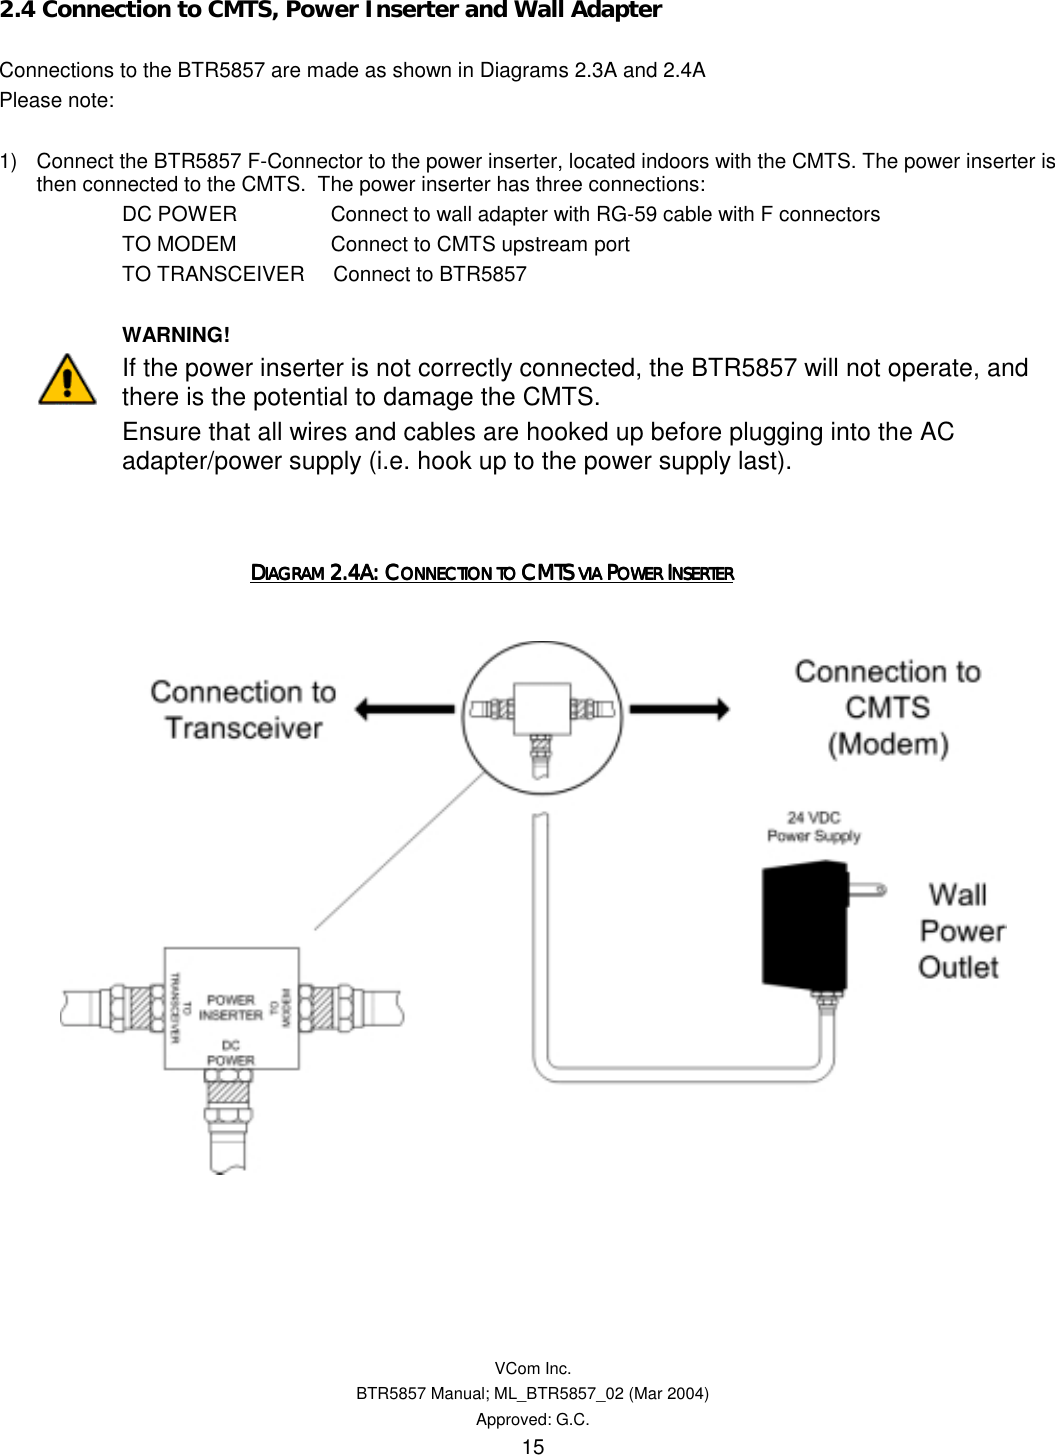   VCom Inc. BTR5857 Manual; ML_BTR5857_02 (Mar 2004) Approved: G.C. 15 2.4 Connection to CMTS, Power Inserter and Wall Adapter  Connections to the BTR5857 are made as shown in Diagrams 2.3A and 2.4A Please note:  1)  Connect the BTR5857 F-Connector to the power inserter, located indoors with the CMTS. The power inserter is then connected to the CMTS.  The power inserter has three connections: DC POWER       Connect to wall adapter with RG-59 cable with F connectors TO MODEM       Connect to CMTS upstream port TO TRANSCEIVER     Connect to BTR5857         WARNING! If the power inserter is not correctly connected, the BTR5857 will not operate, and there is the potential to damage the CMTS.   Ensure that all wires and cables are hooked up before plugging into the AC adapter/power supply (i.e. hook up to the power supply last).           DDDDIAGRAM IAGRAM IAGRAM IAGRAM 2.4A: C2.4A: C2.4A: C2.4A: CONNECTION TO ONNECTION TO ONNECTION TO ONNECTION TO CMTS CMTS CMTS CMTS VIA VIA VIA VIA PPPPOWER OWER OWER OWER IIIINSERTERNSERTERNSERTERNSERTER         